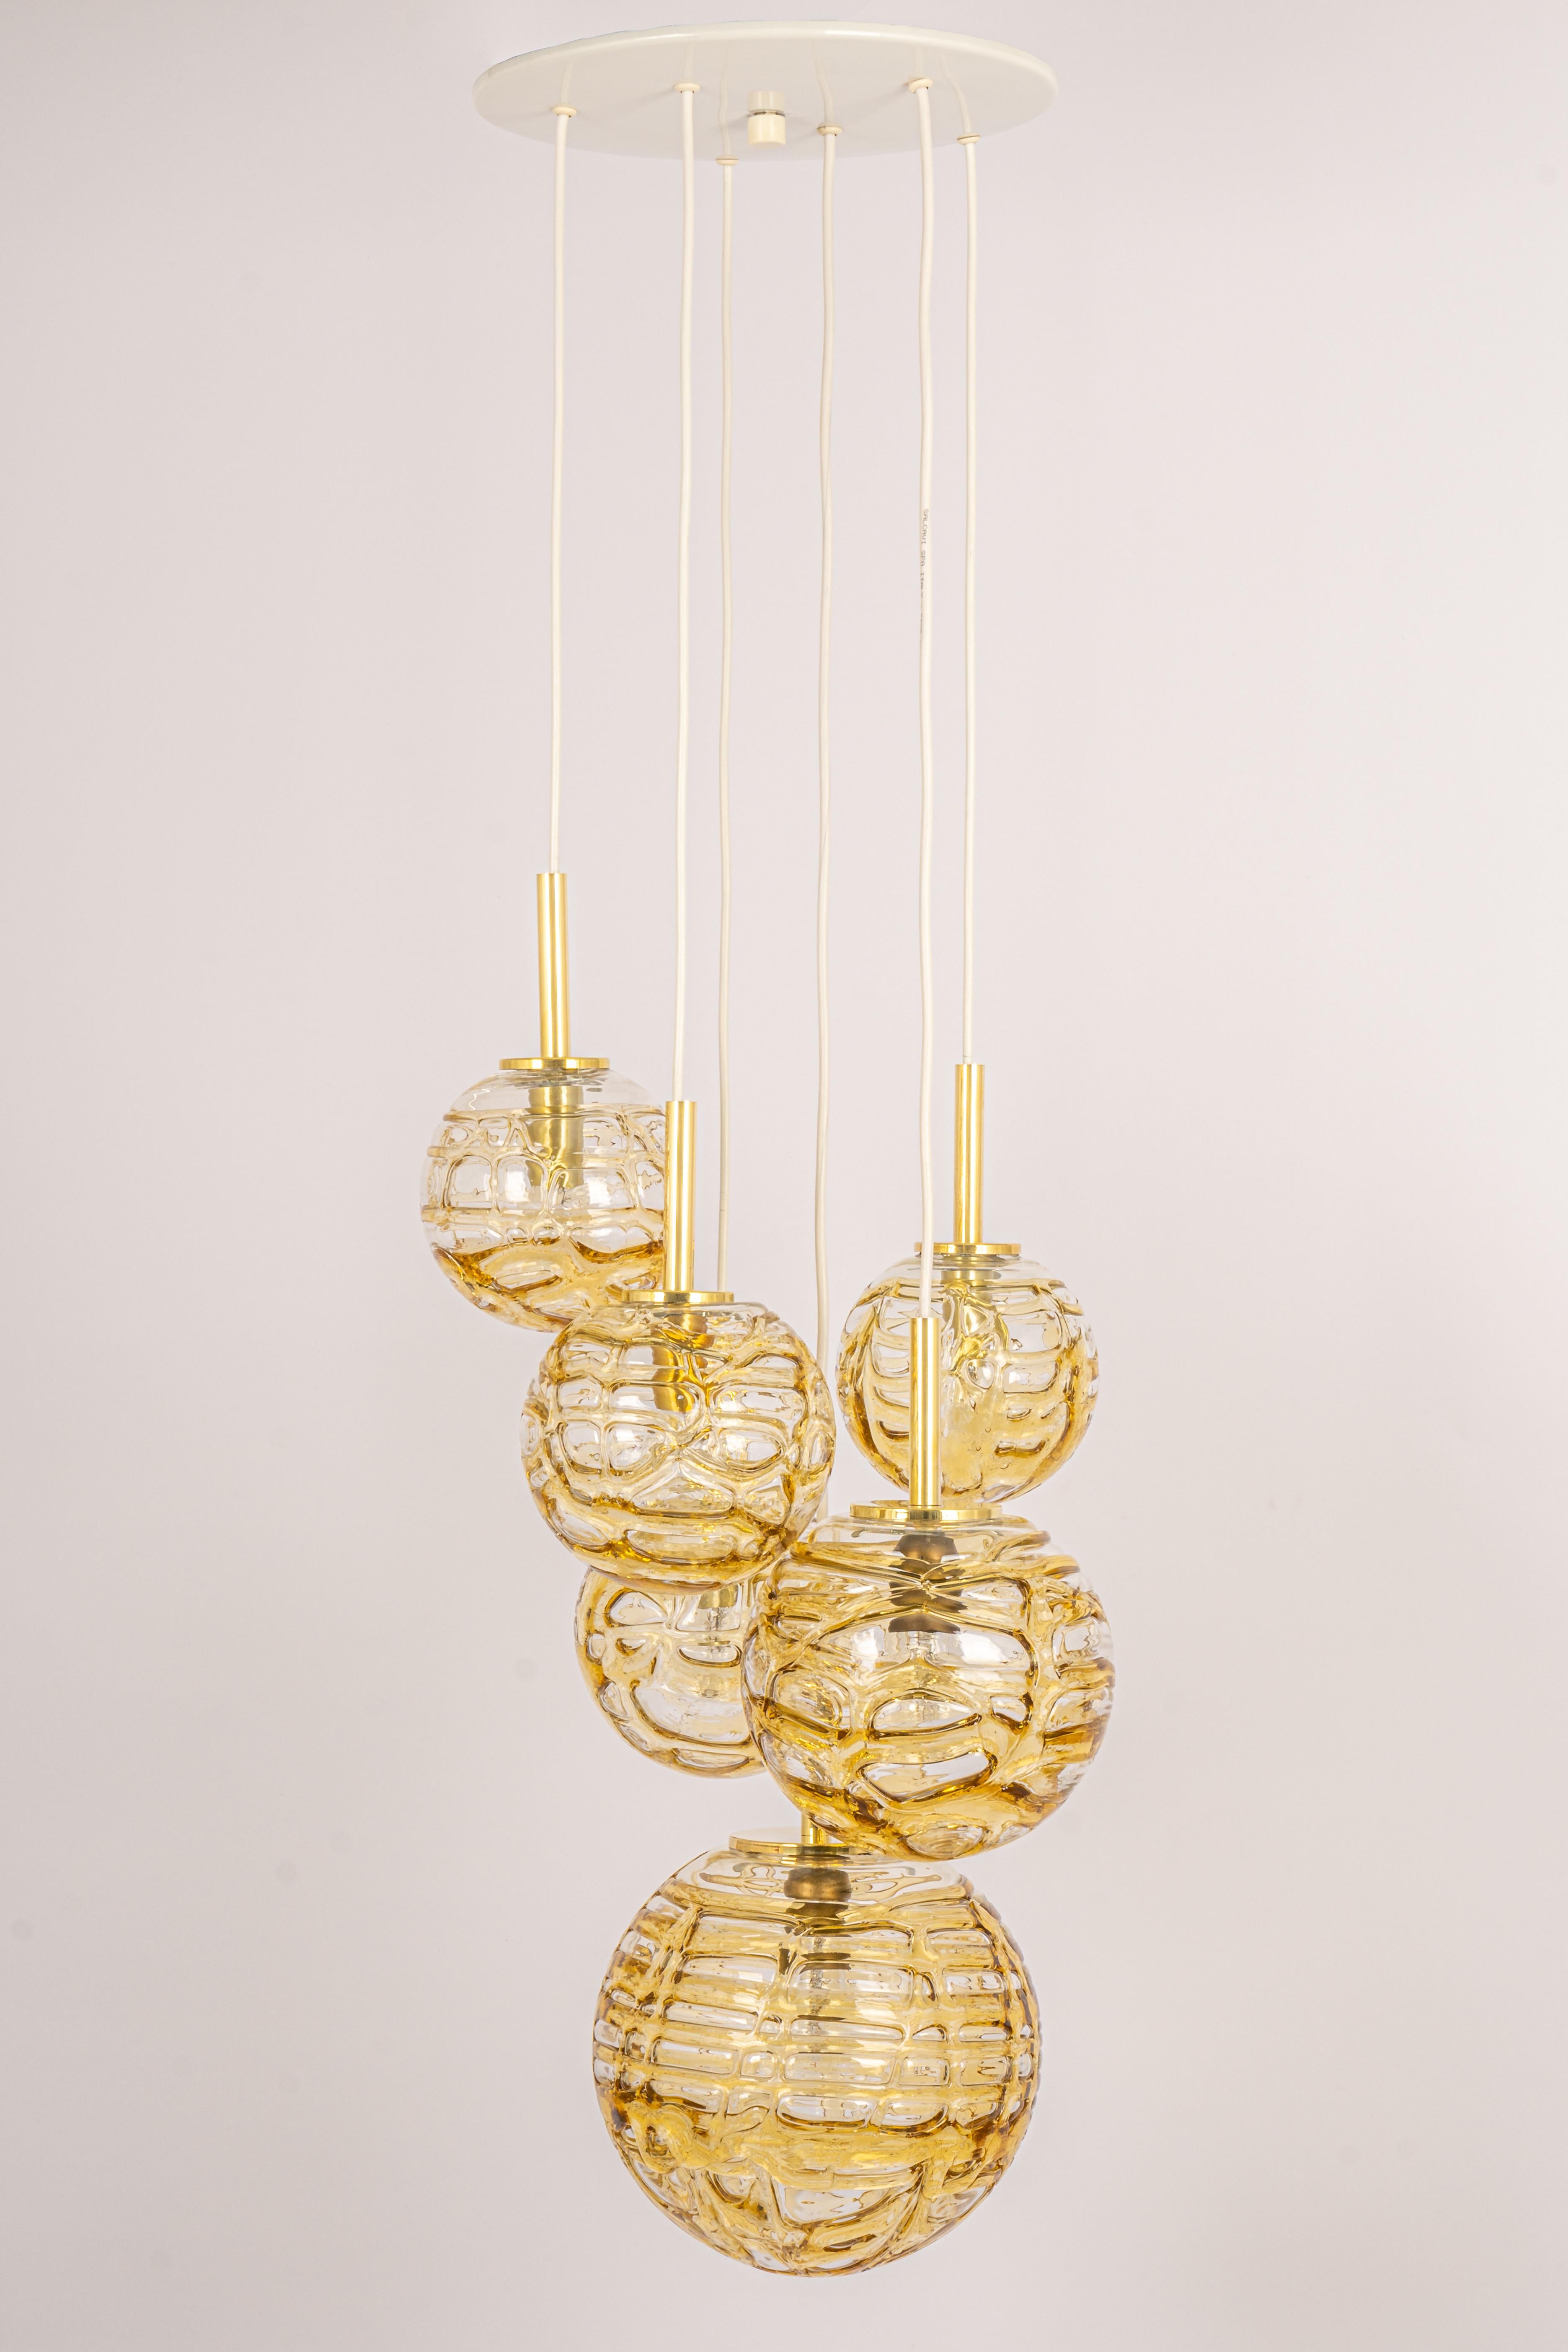 Large Designer Cascading Chandelier Murano Glass by Doria, Germany, 1970s For Sale 5